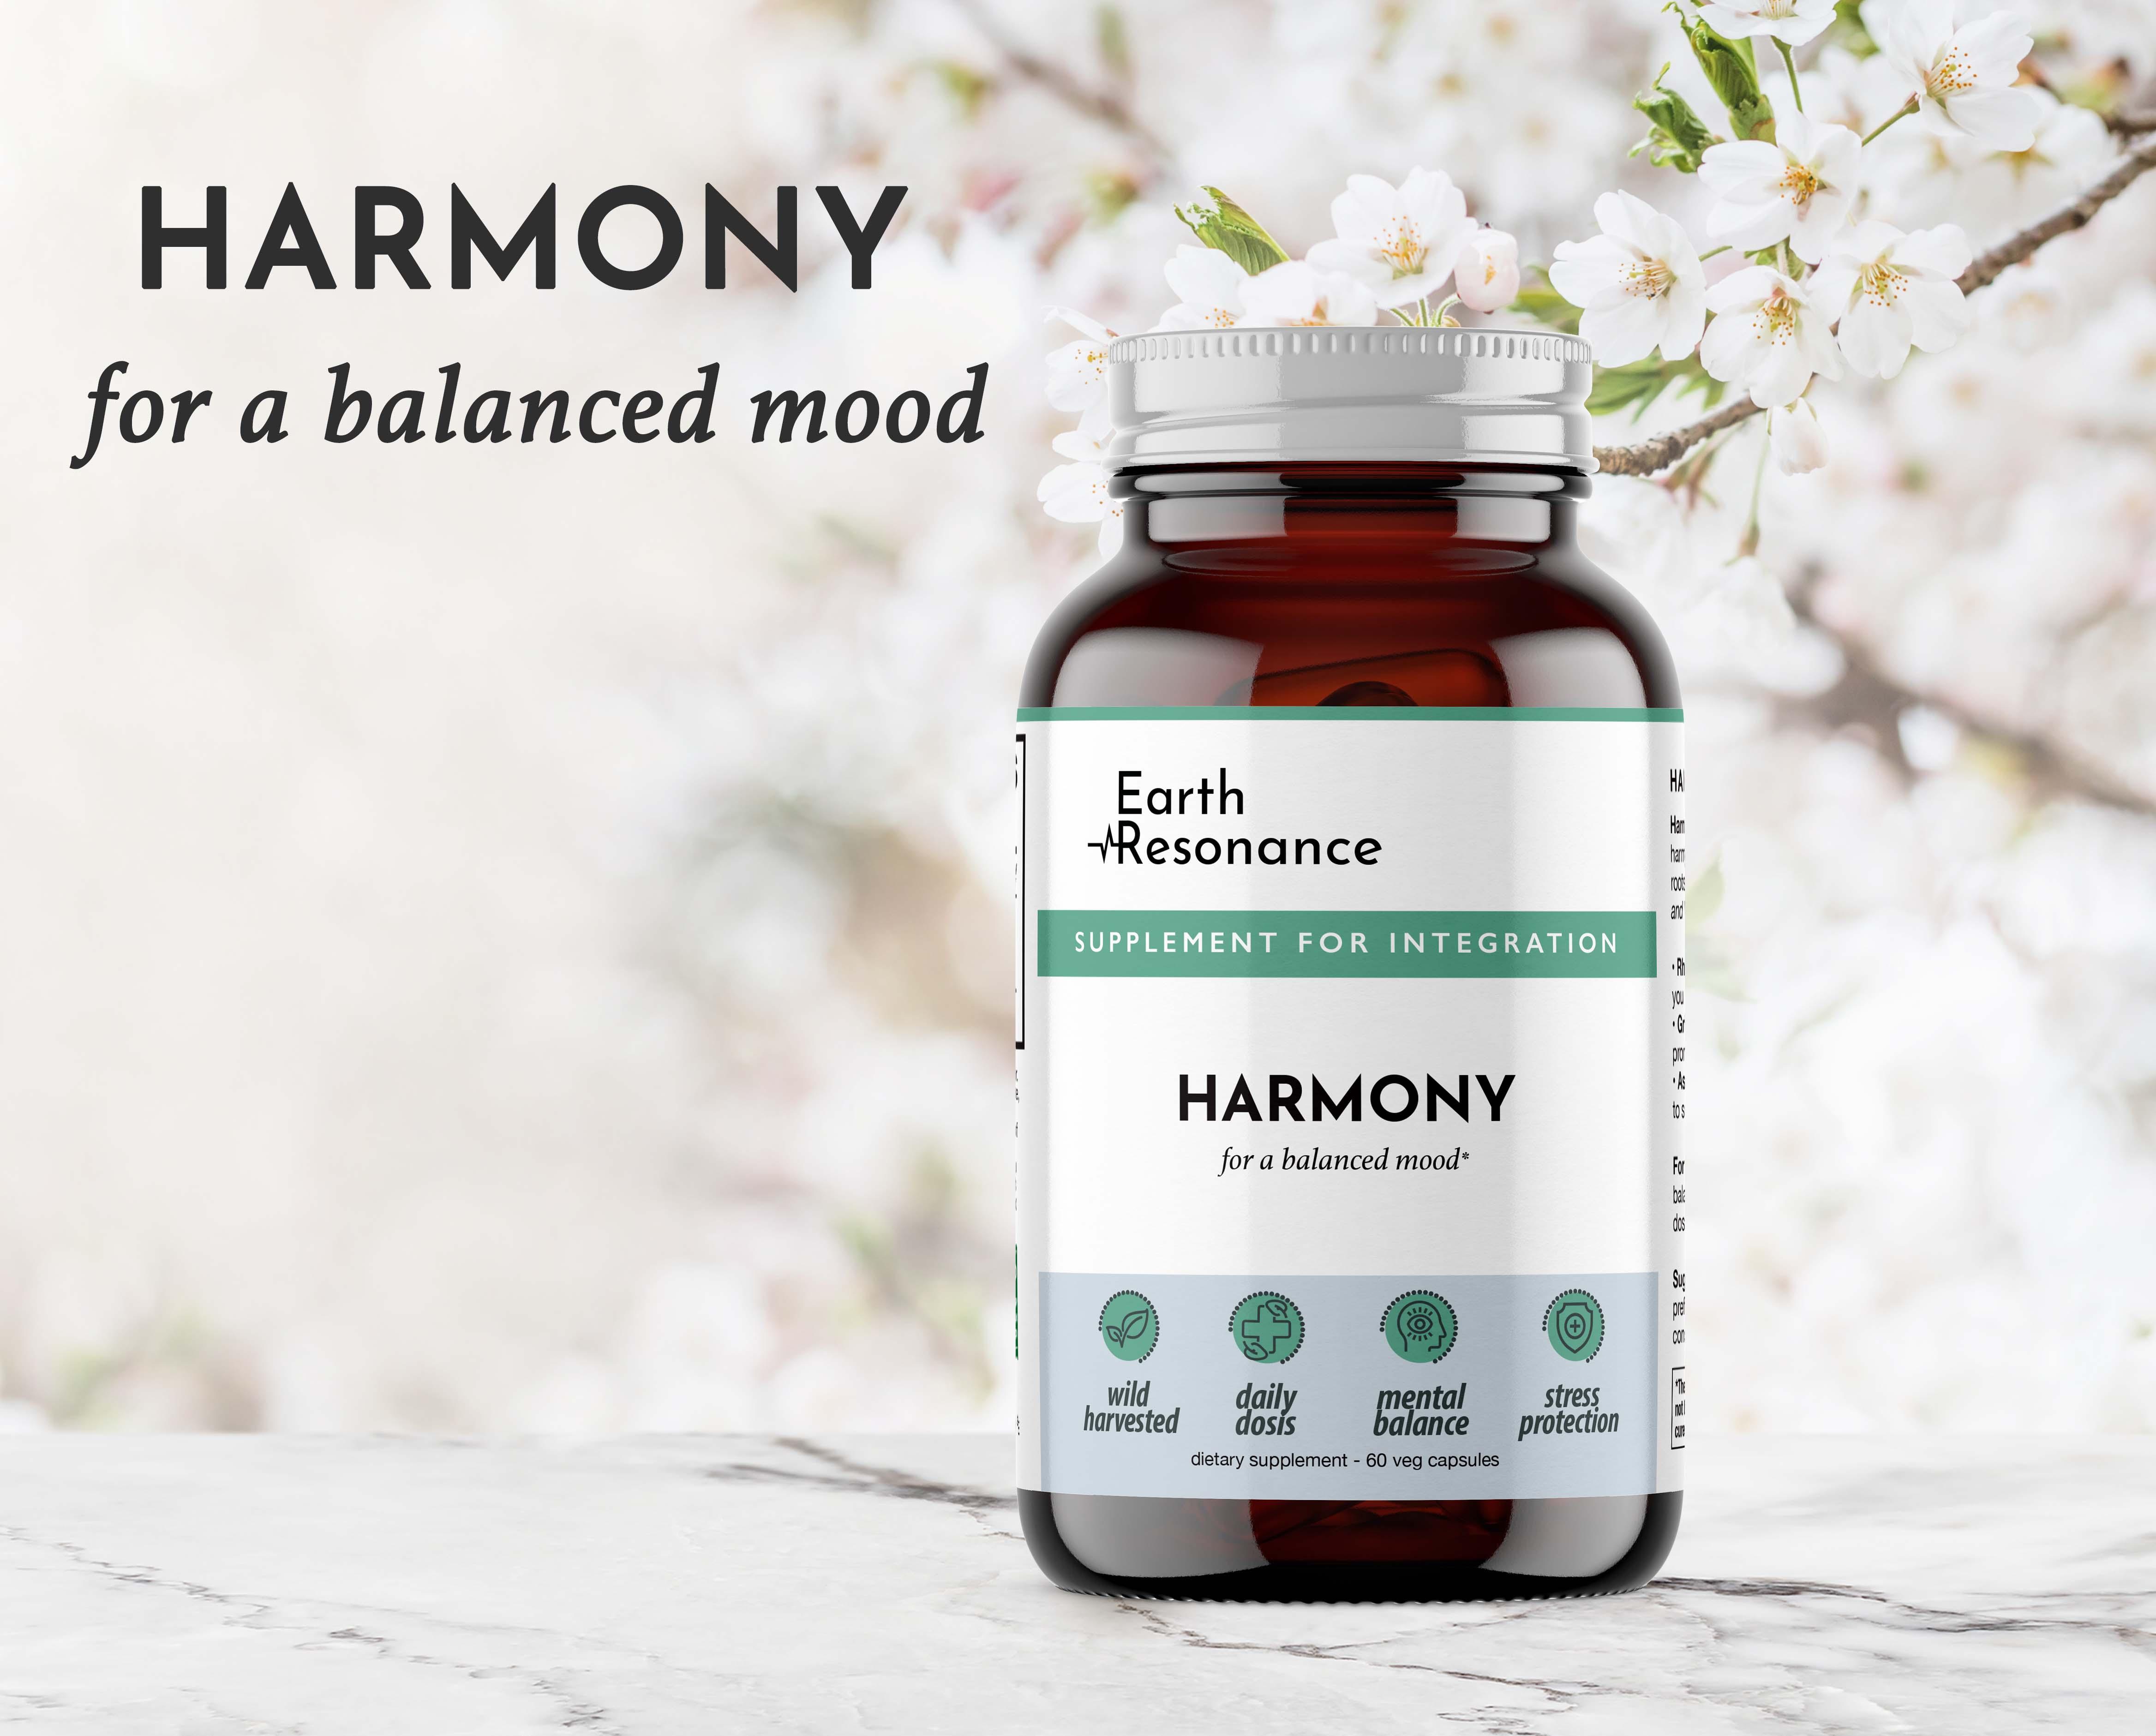 Mind & Mood in Harmony - 5 Benefits of Our Natural Supplement for Emotional Wellness